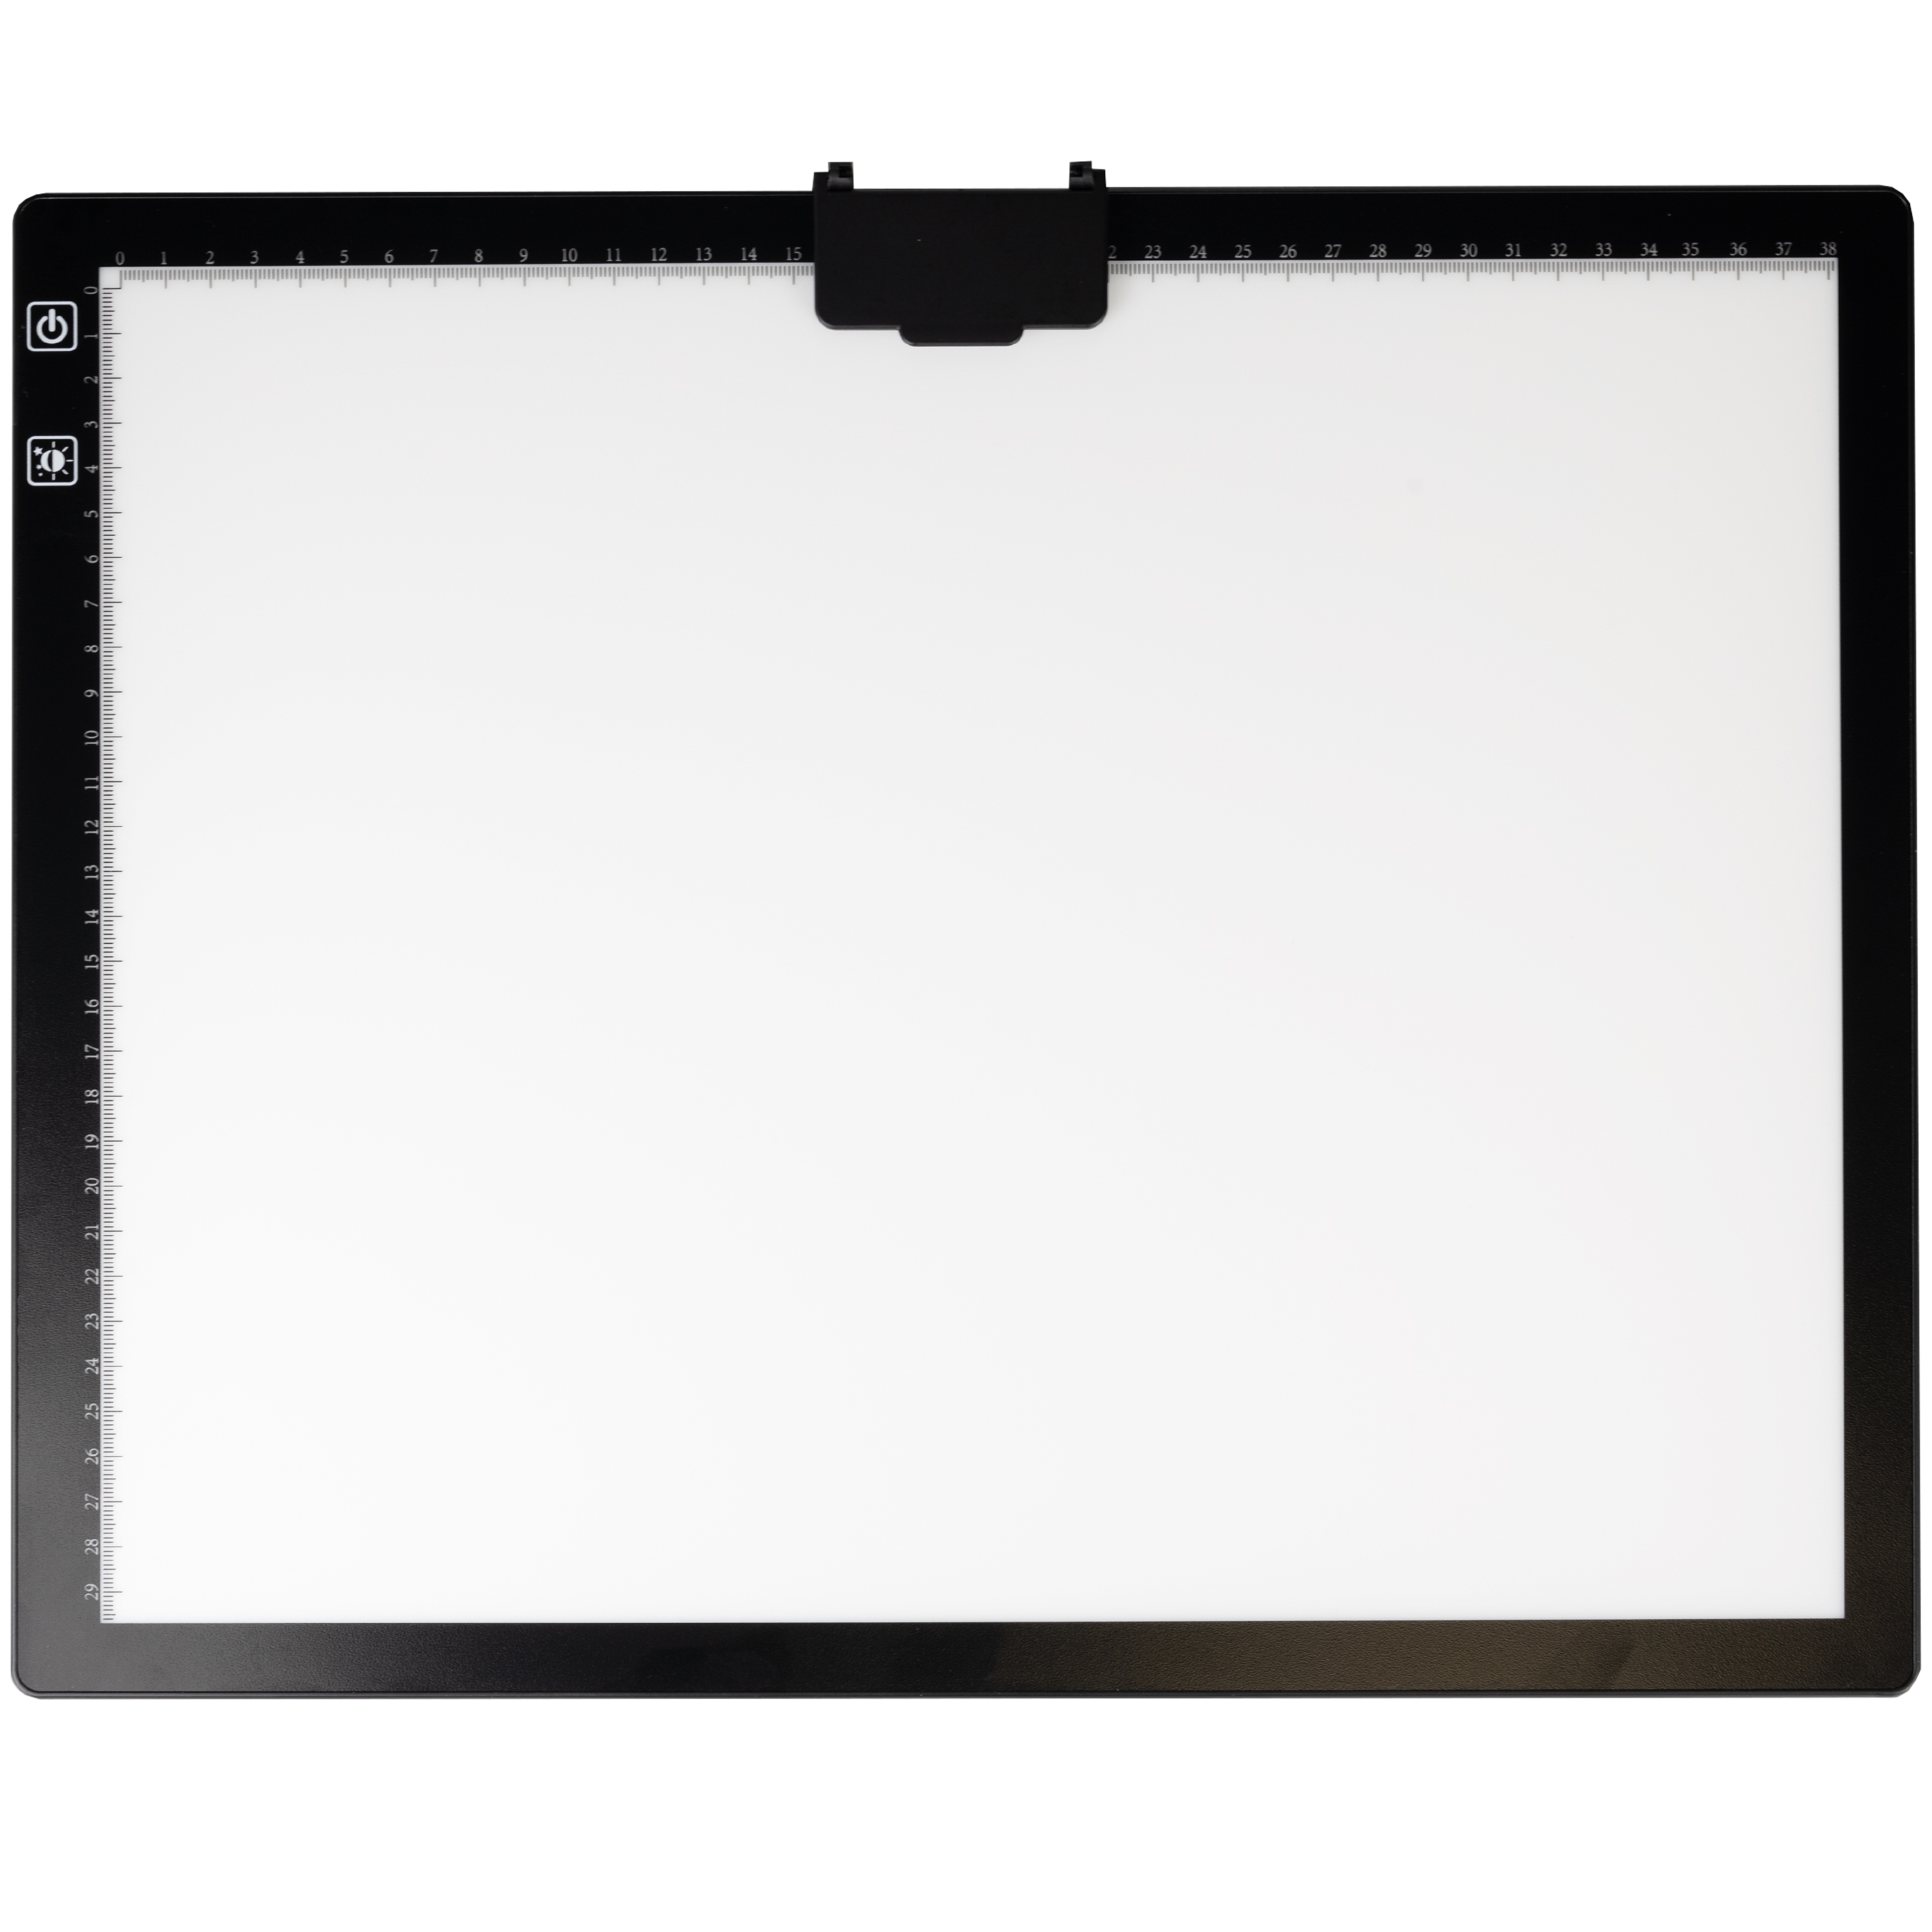 Crafts&Co A3 Light Pad Premium - the latest must-have! - Crafts&Co